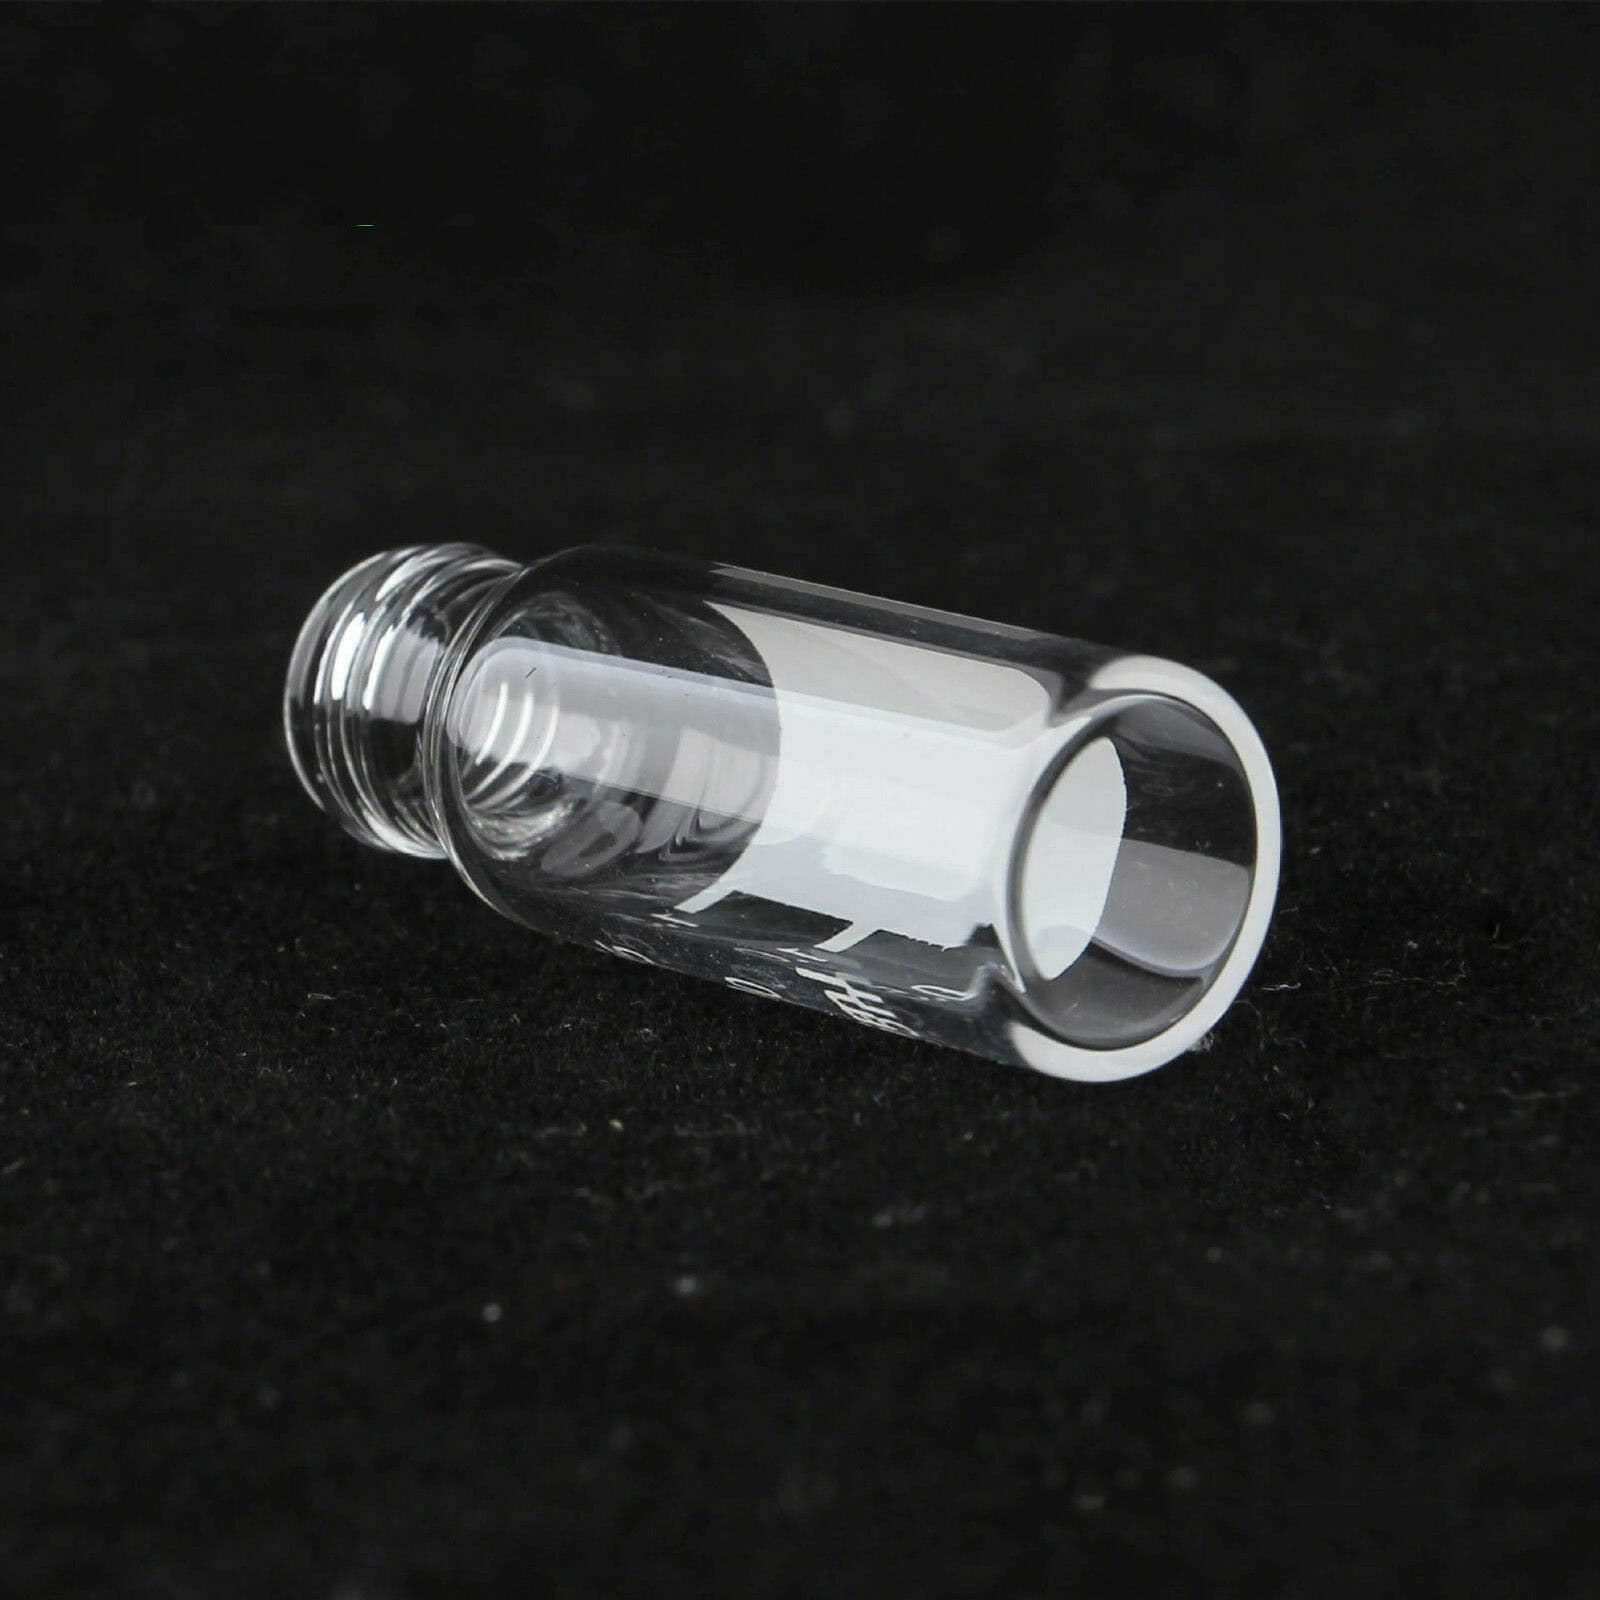 1.5mL 9-425 Screw Neck Vial with patch price waters